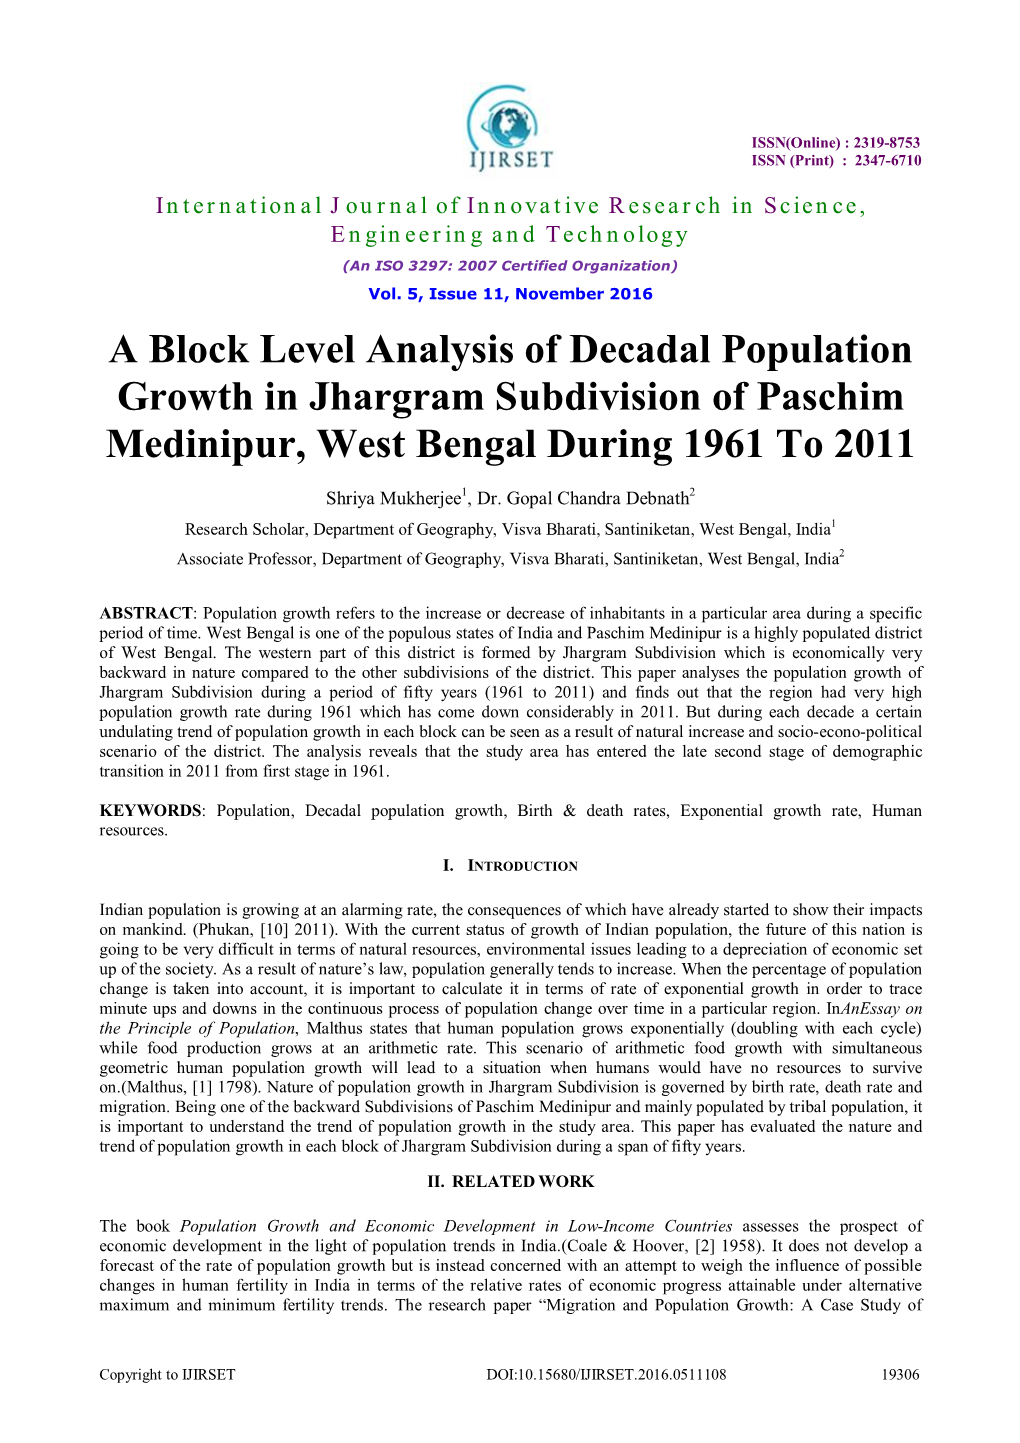 A Block Level Analysis of Decadal Population Growth in Jhargram Subdivision of Paschim Medinipur, West Bengal During 1961 to 2011